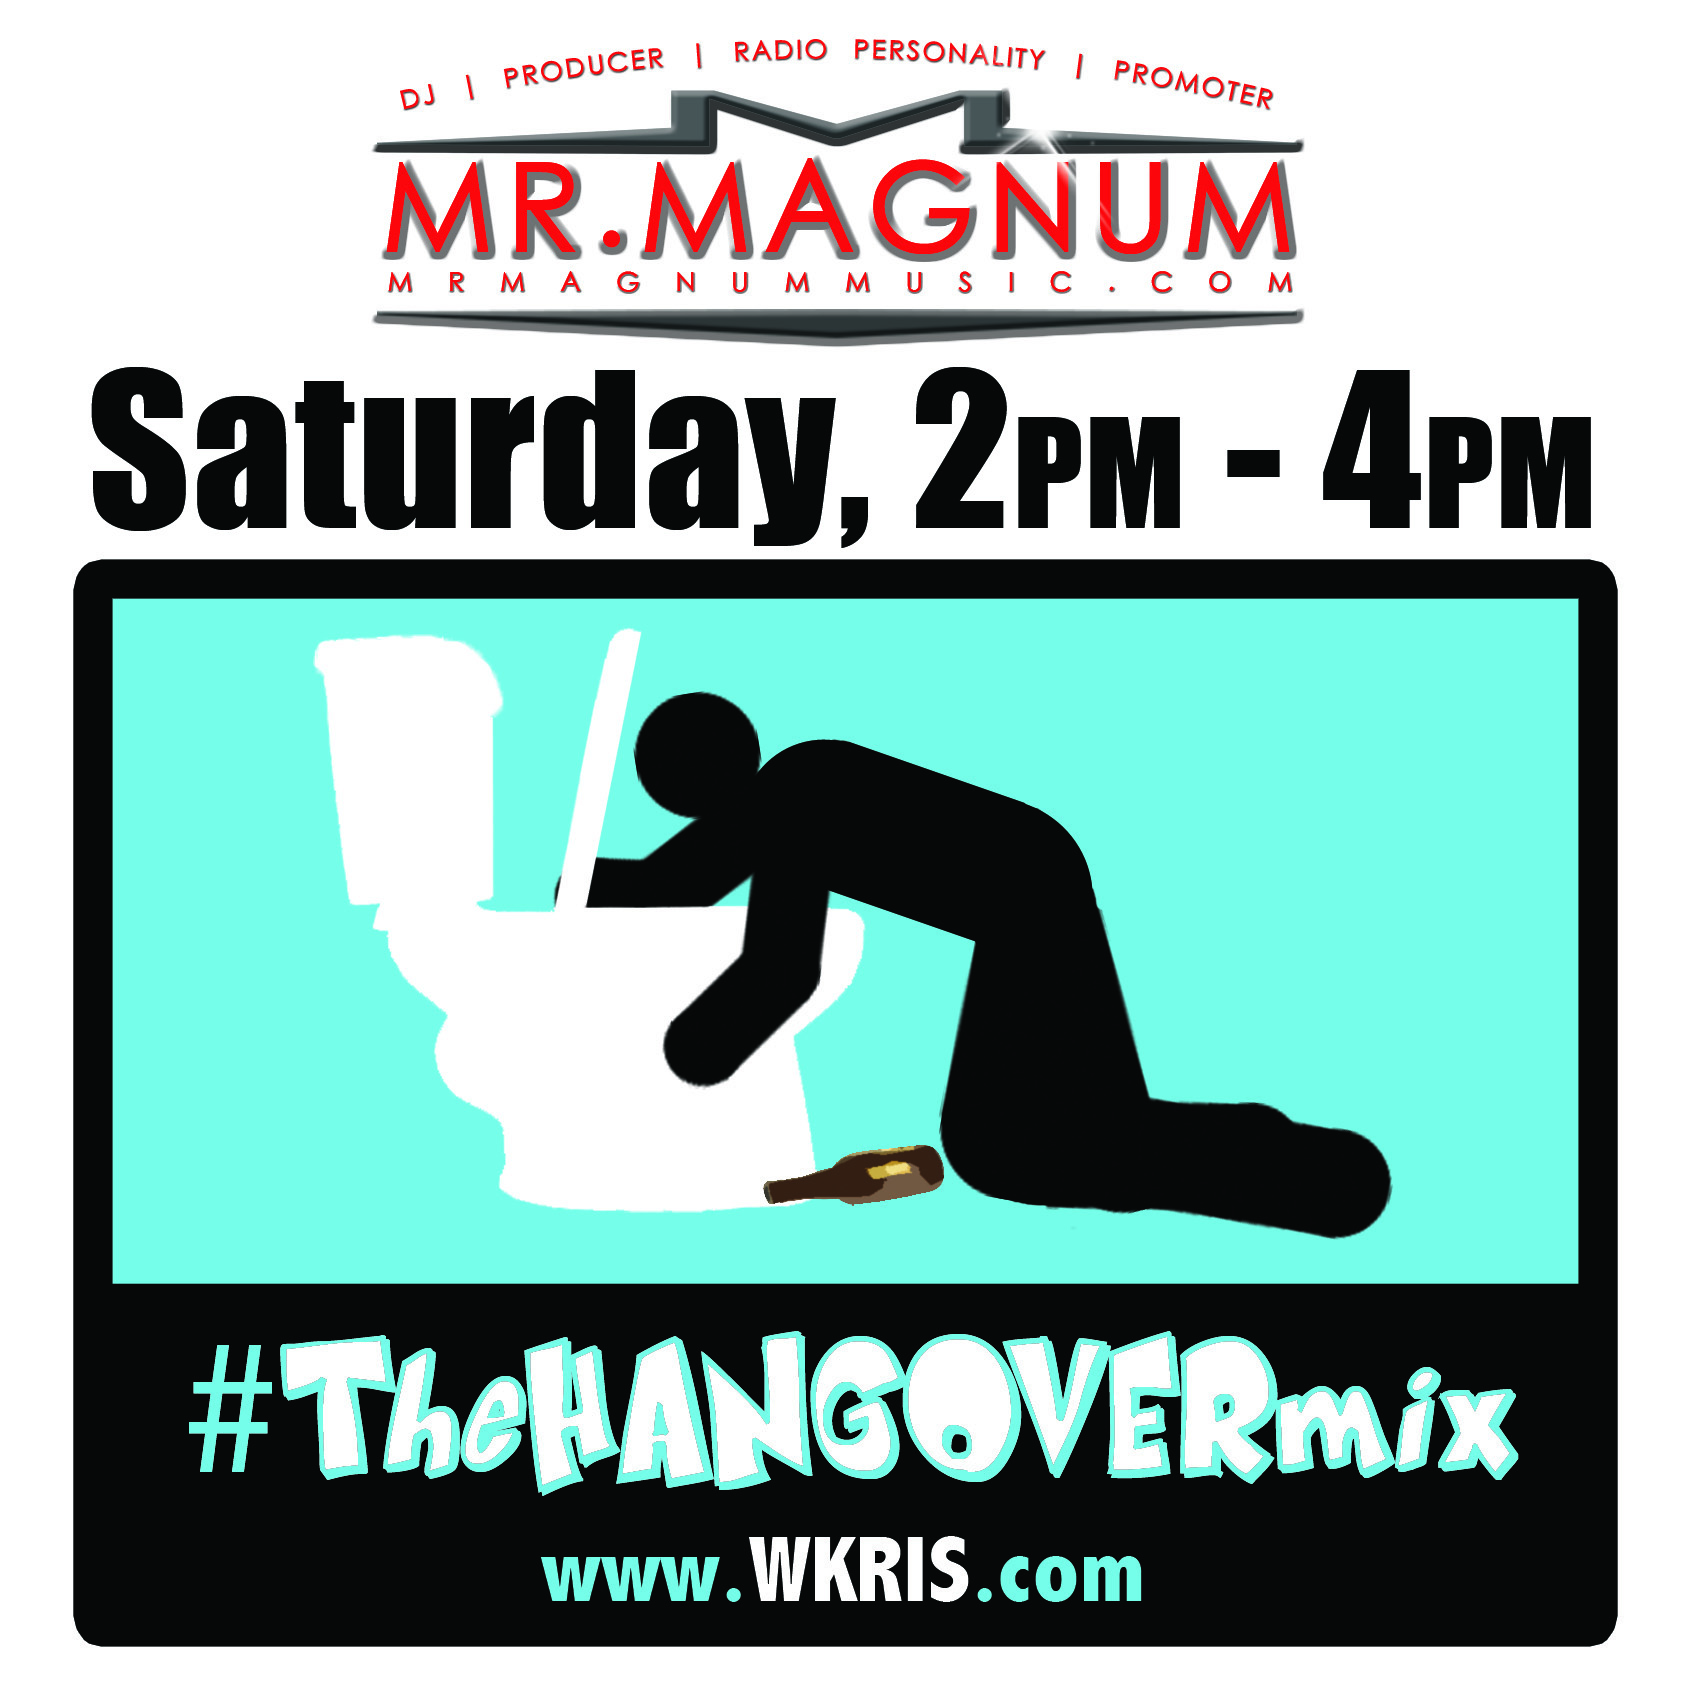 The Hangover Mix With Mr. Magnum on Koffee Radio